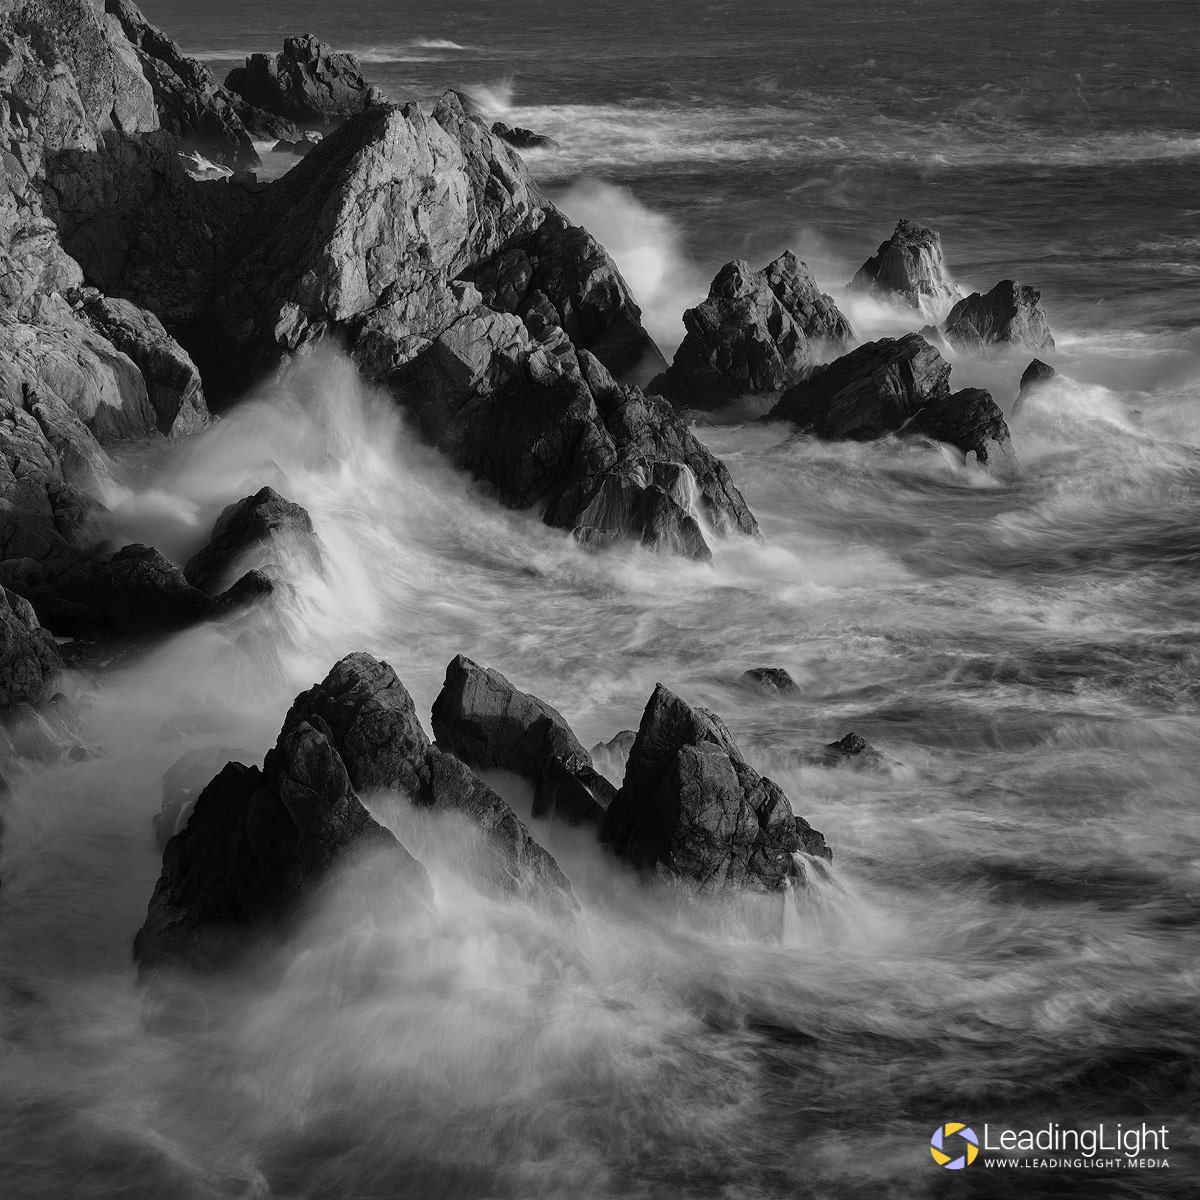 A re-shoot of an award-winning black and white photograph from 15 years ago. Stormy seas ravage rocks at Les Tielles, Guernsey.